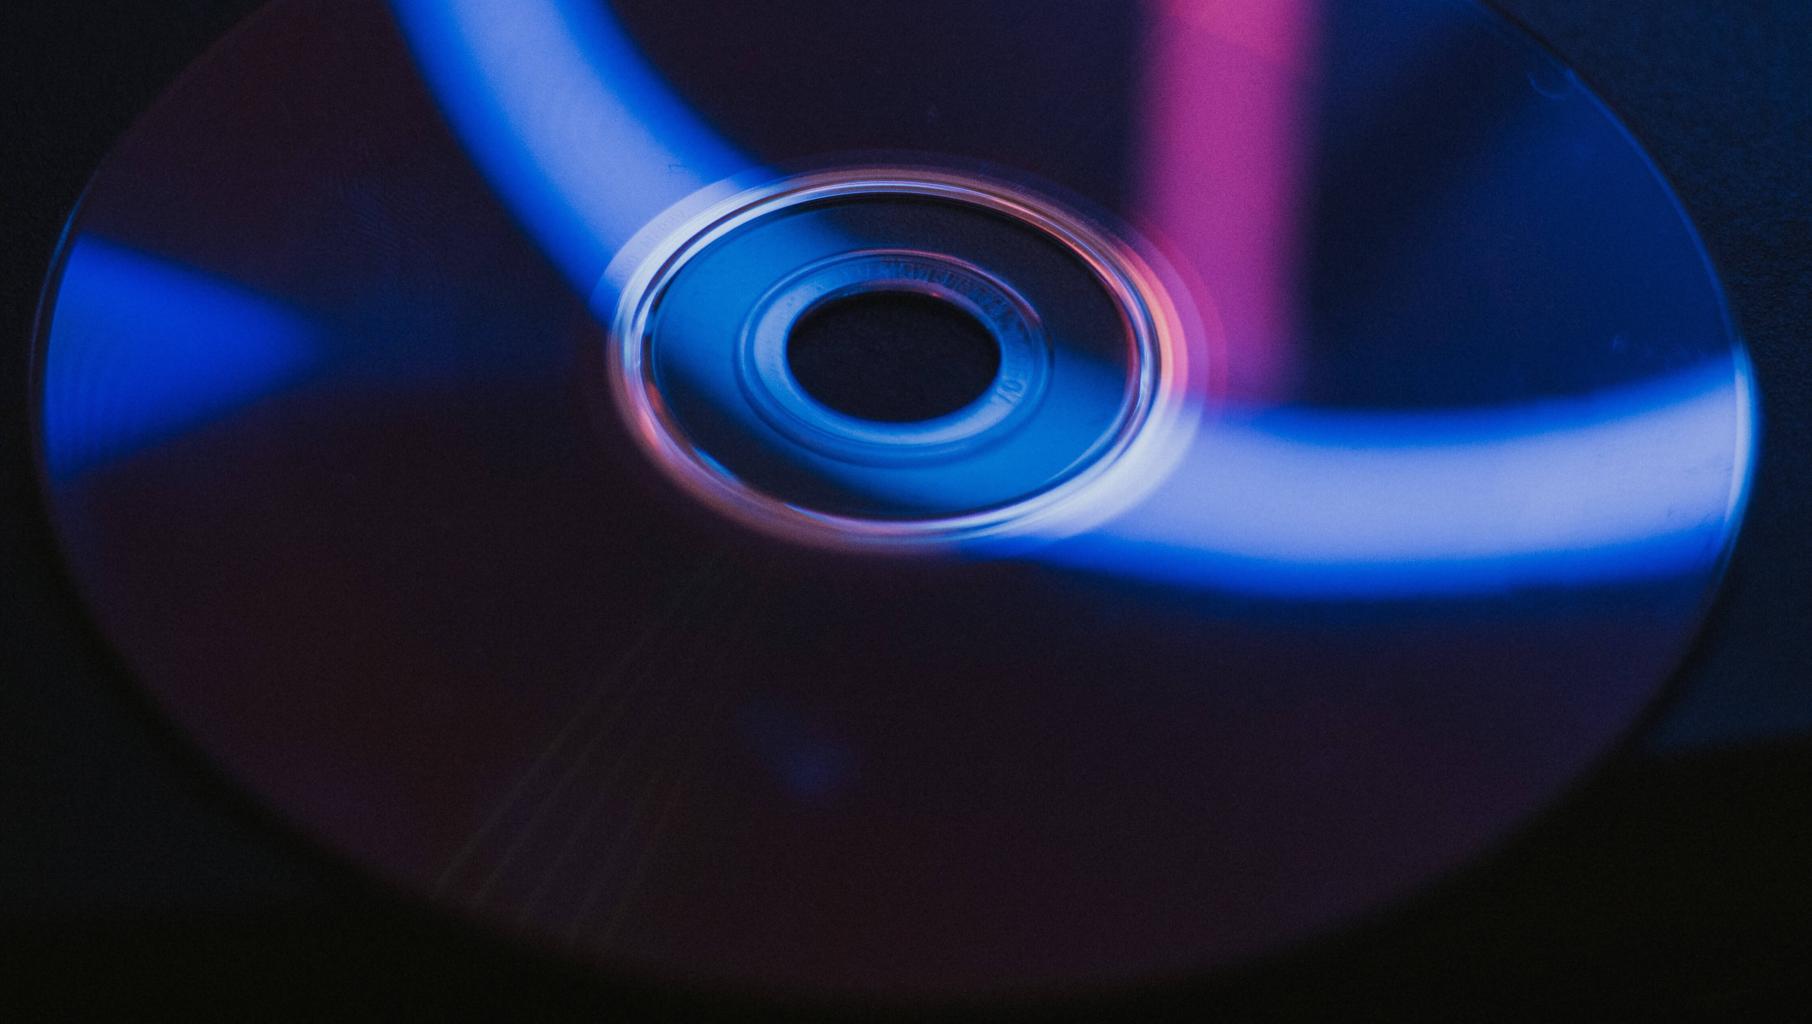 Blue and black DVD. Photo by Gio Bartlett on Unsplash.